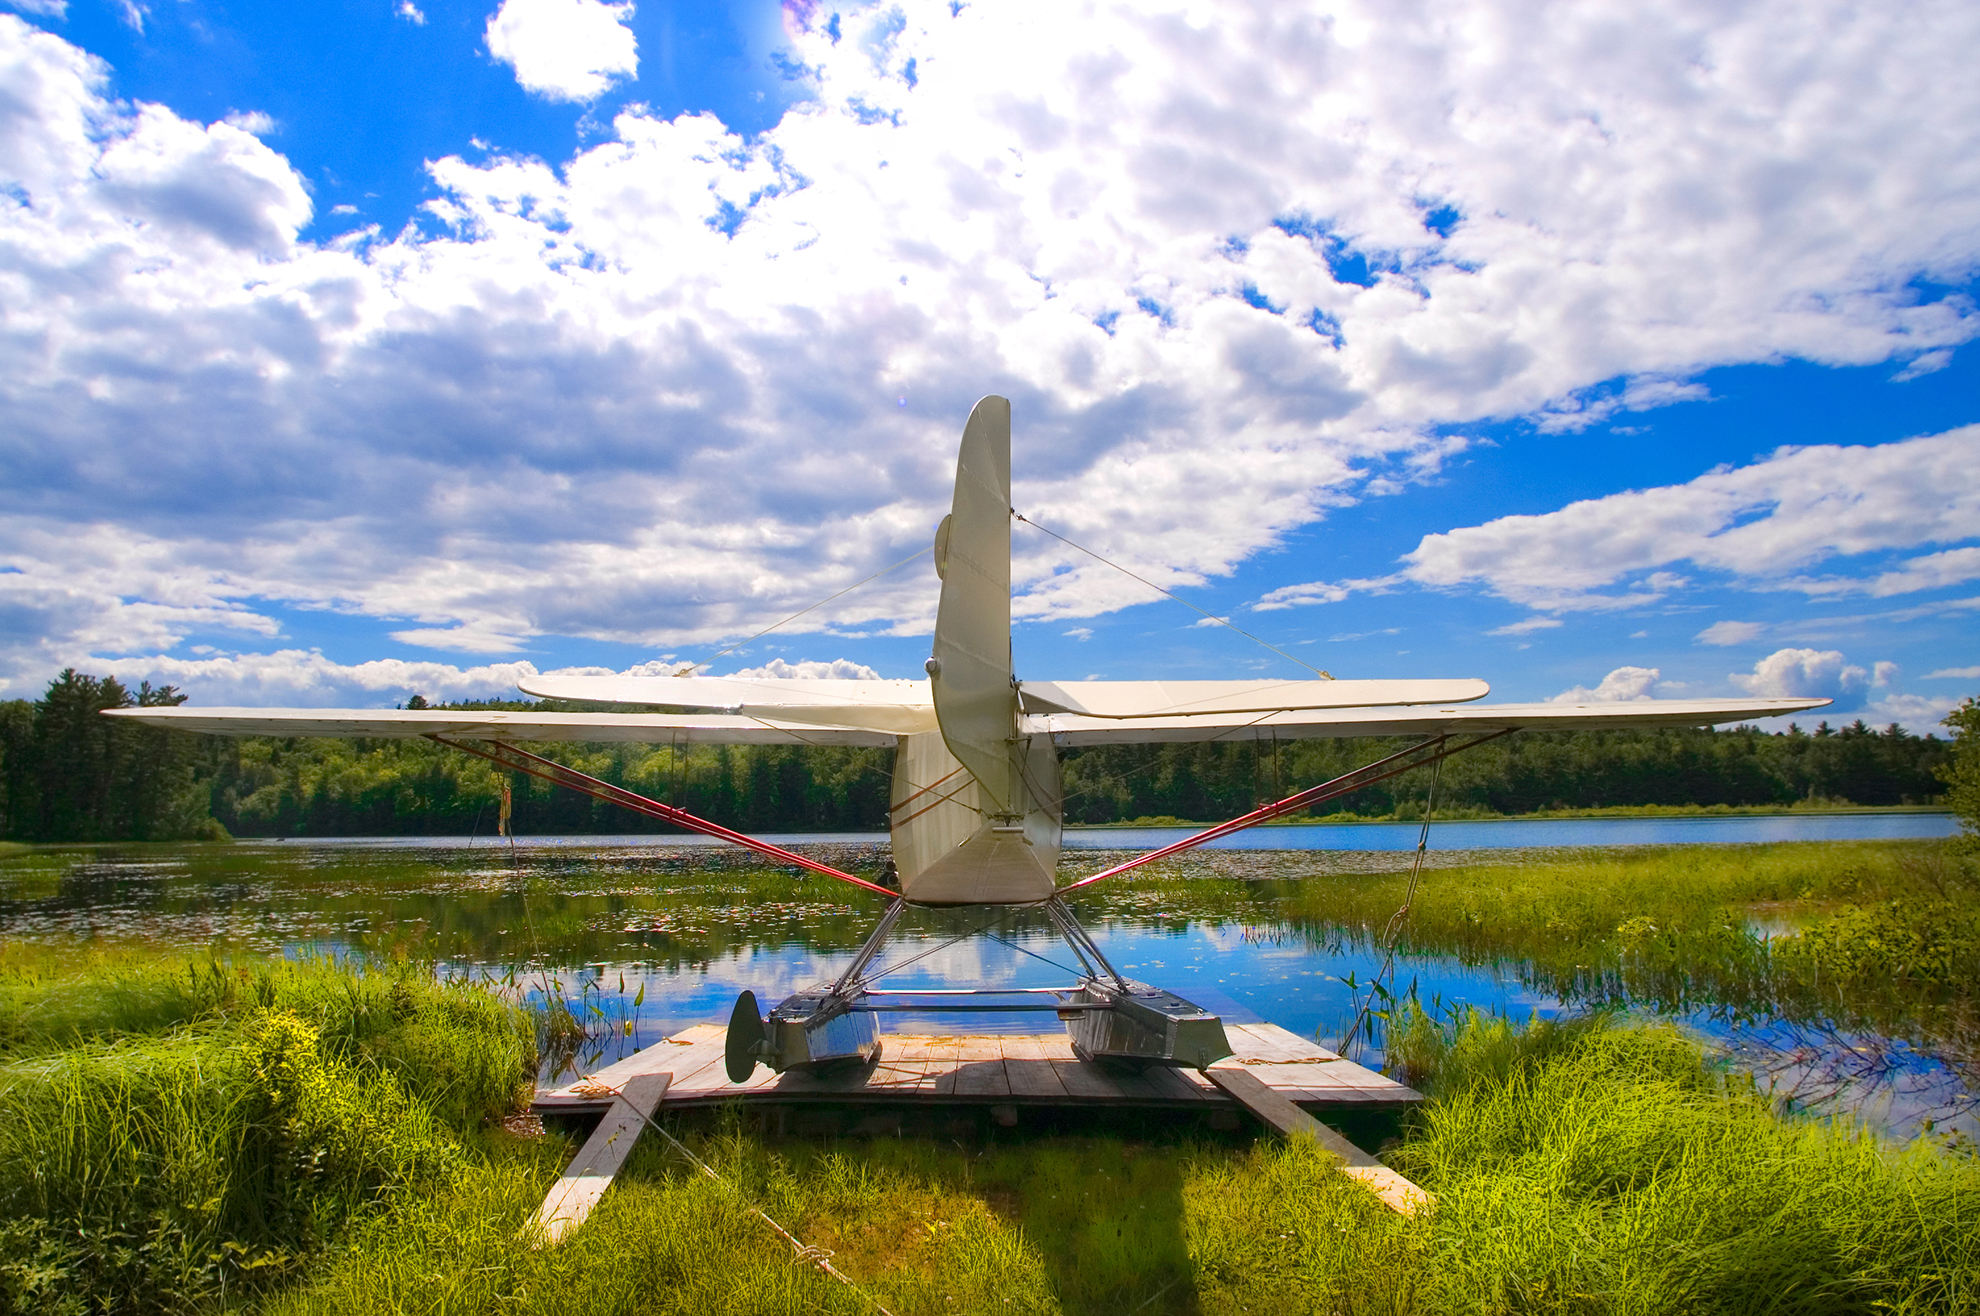 airplane perched on wooden platform surrounded by open marshy waters and plants